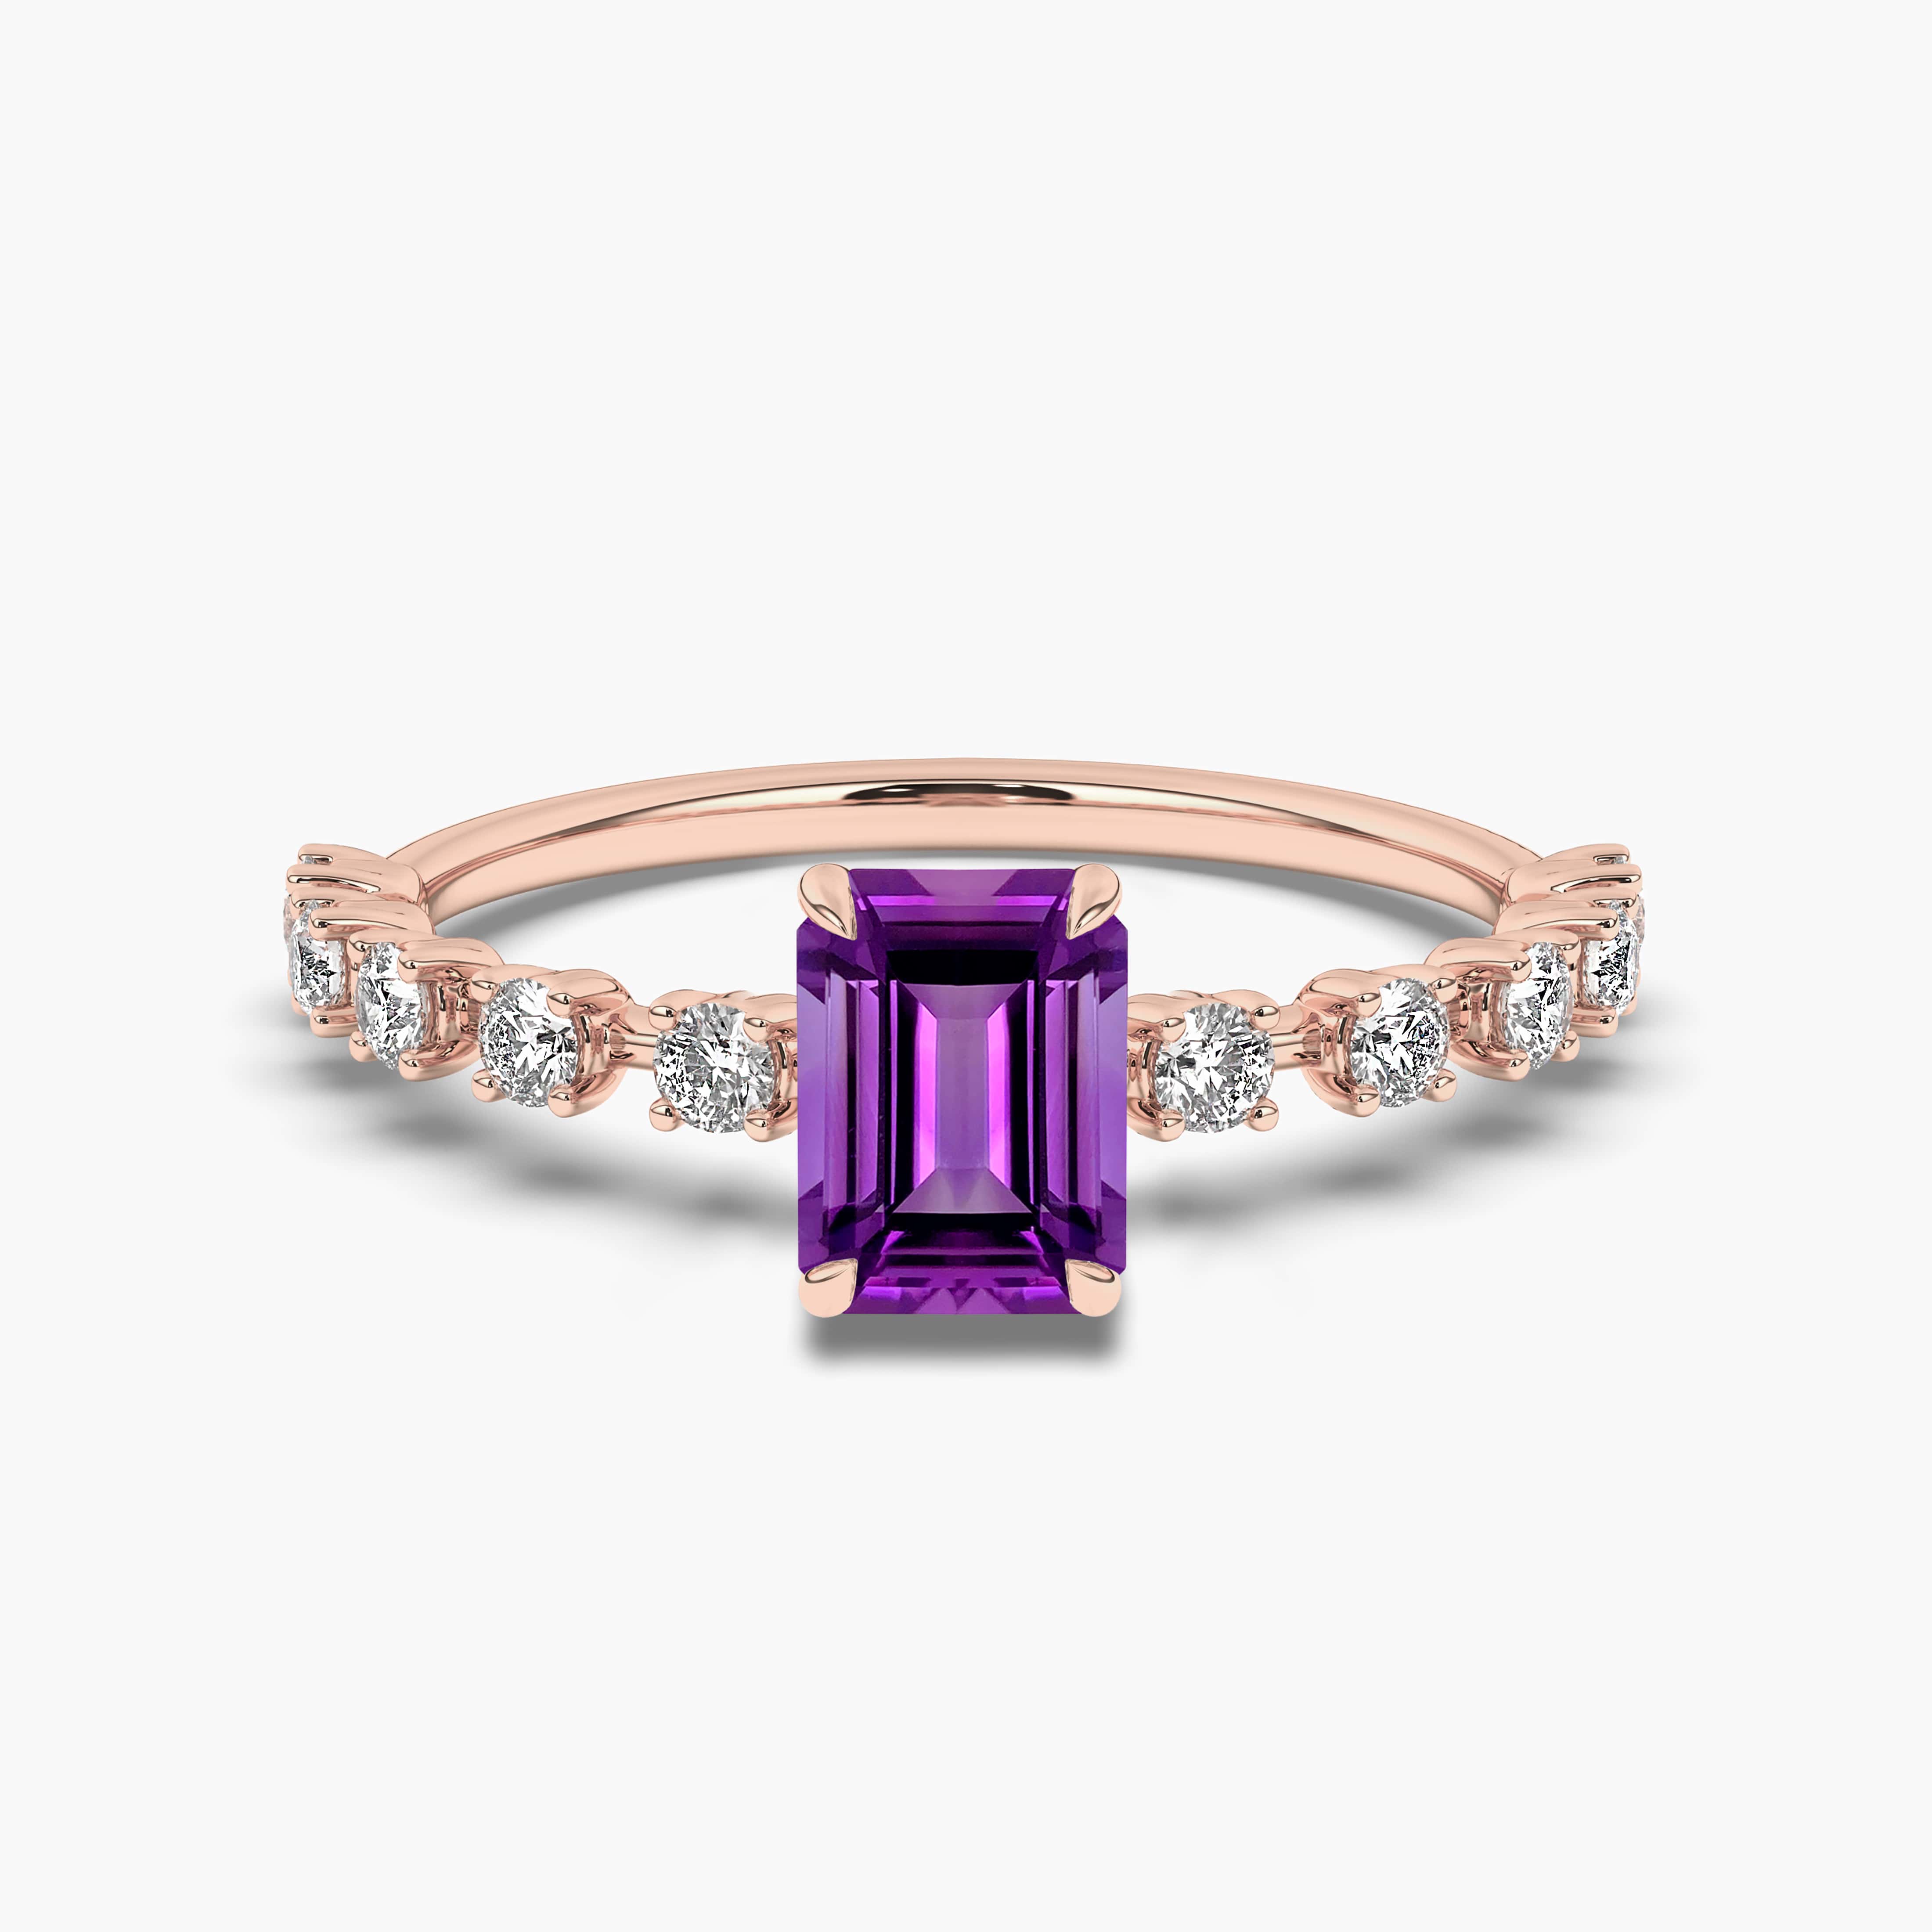 Emerald Cut Amethyst Diamond Solitaire Engagement Ring Rose Gold